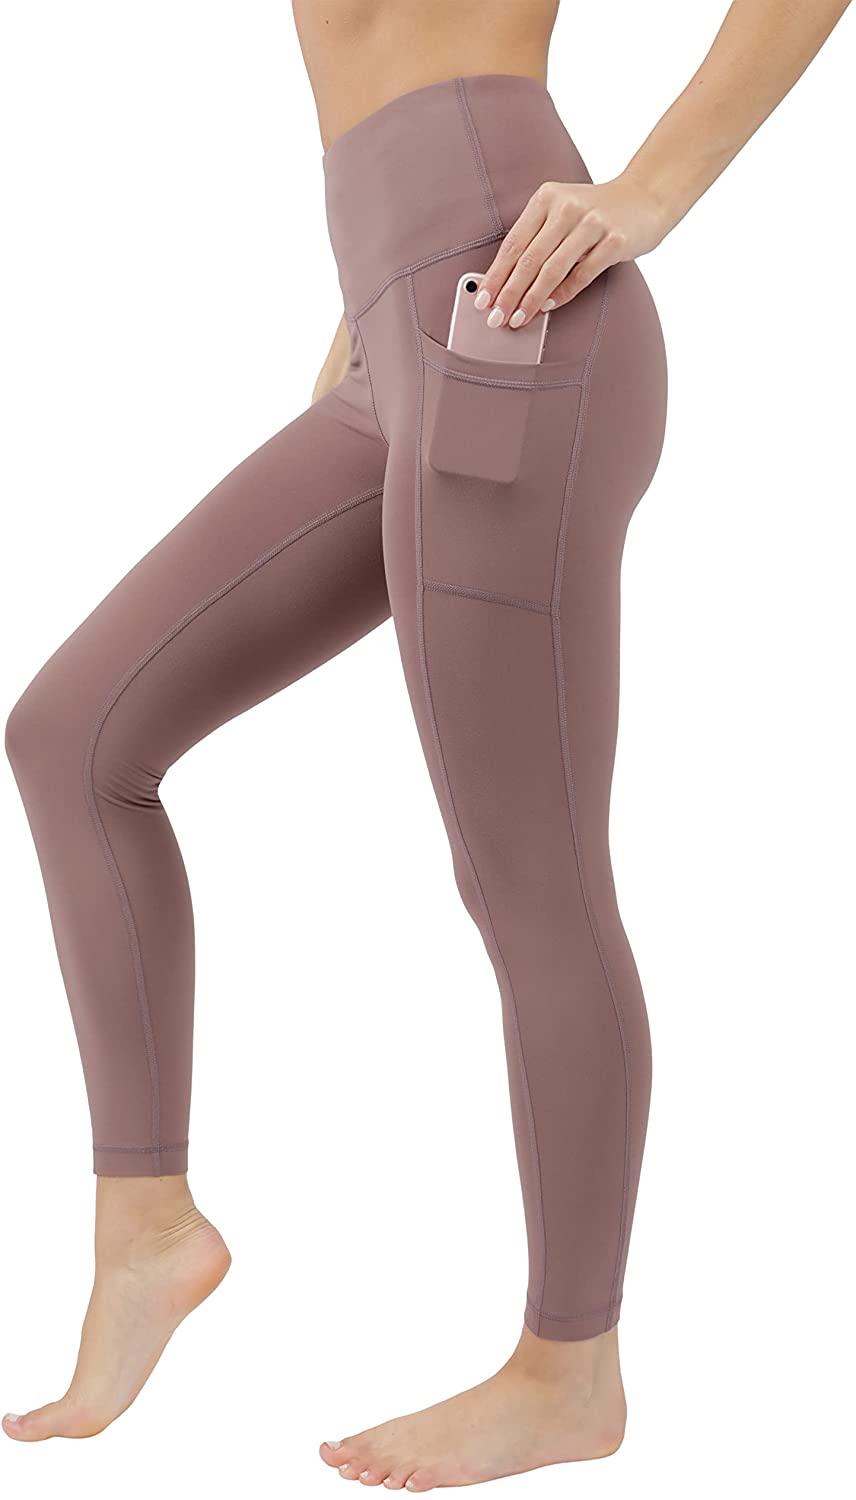 Yogalicious High Waist Ultra Soft Ankle Length Leggings with